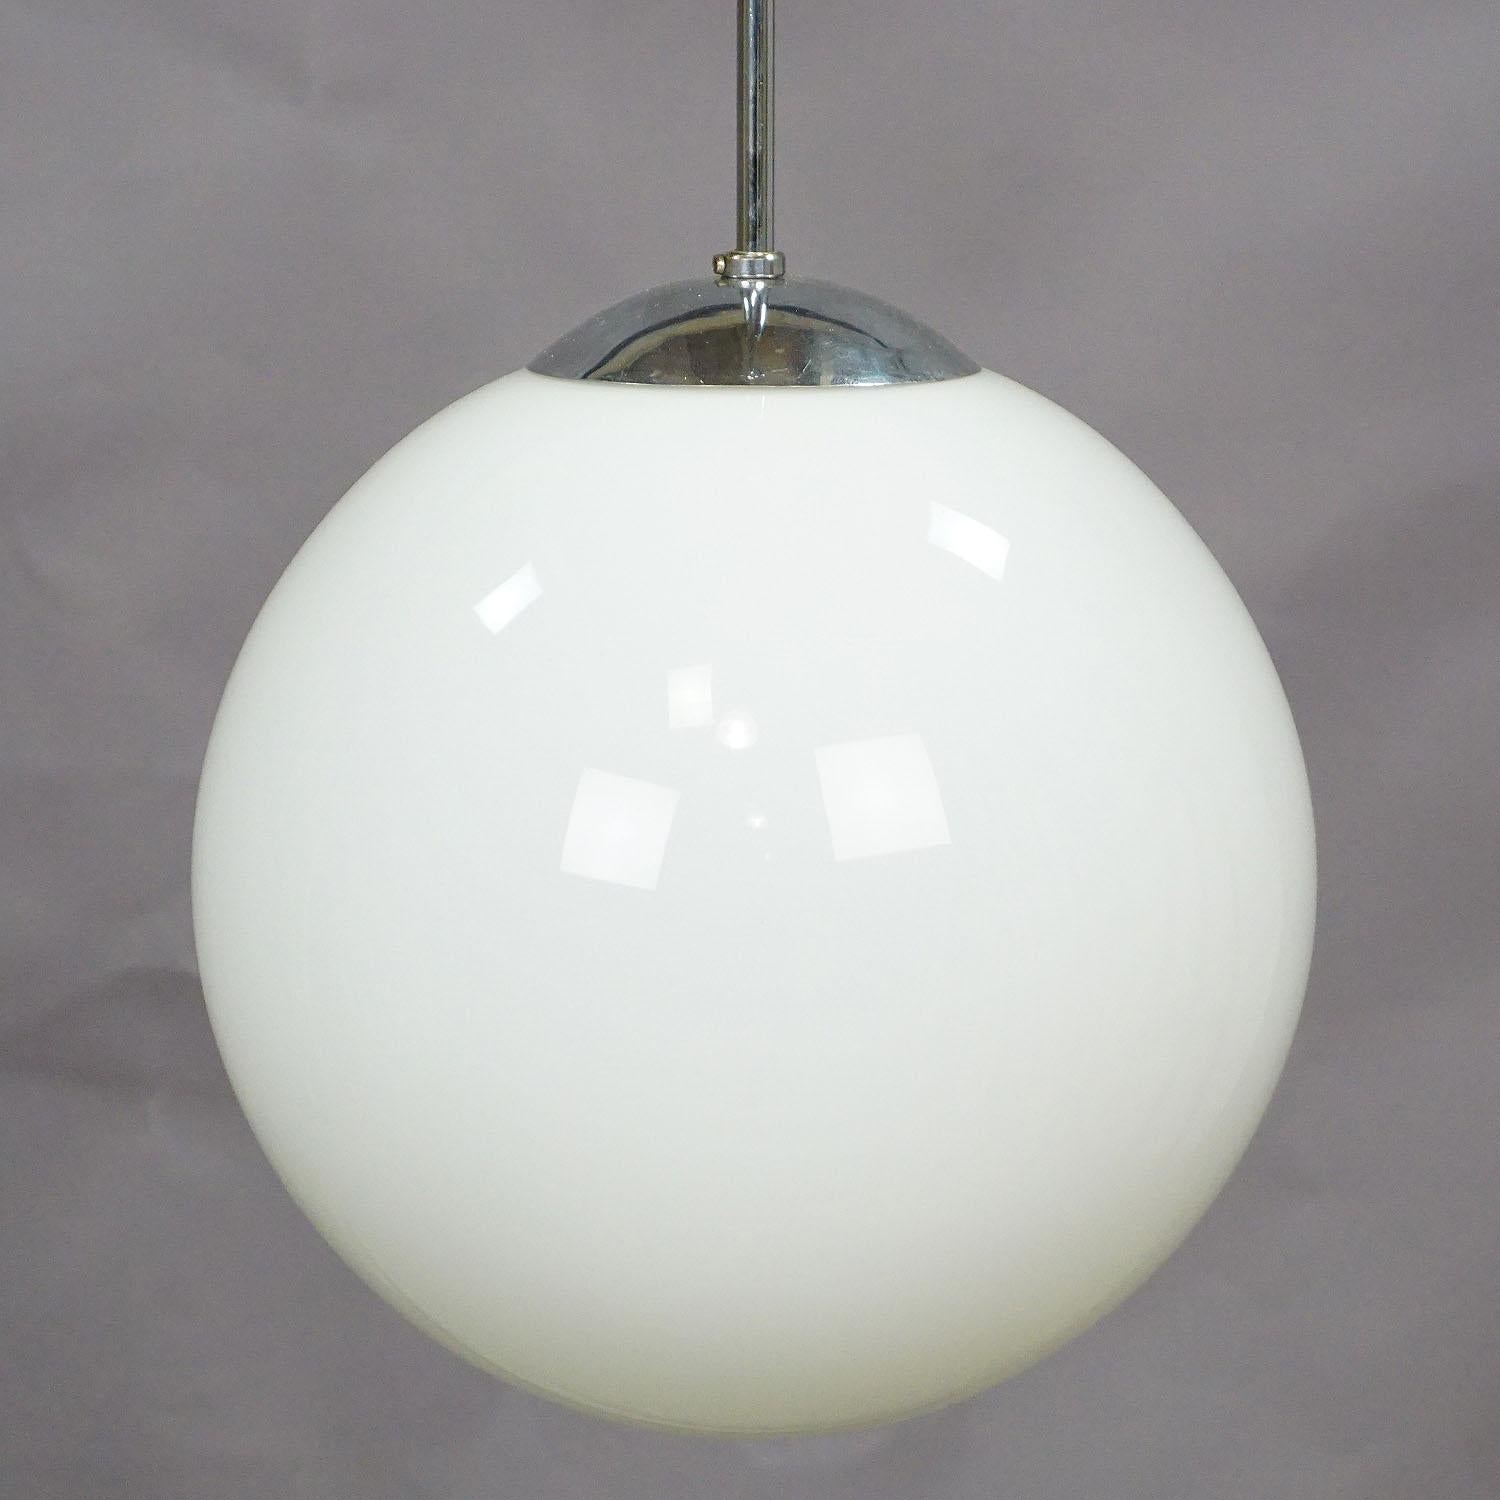 An antique Bauhaus style pendant lamp with a large white opaline glass shade and chromium plated metal suspension. Cabling renewed, working order. With international E27 base lamp holder.

Measures: Height 35.43